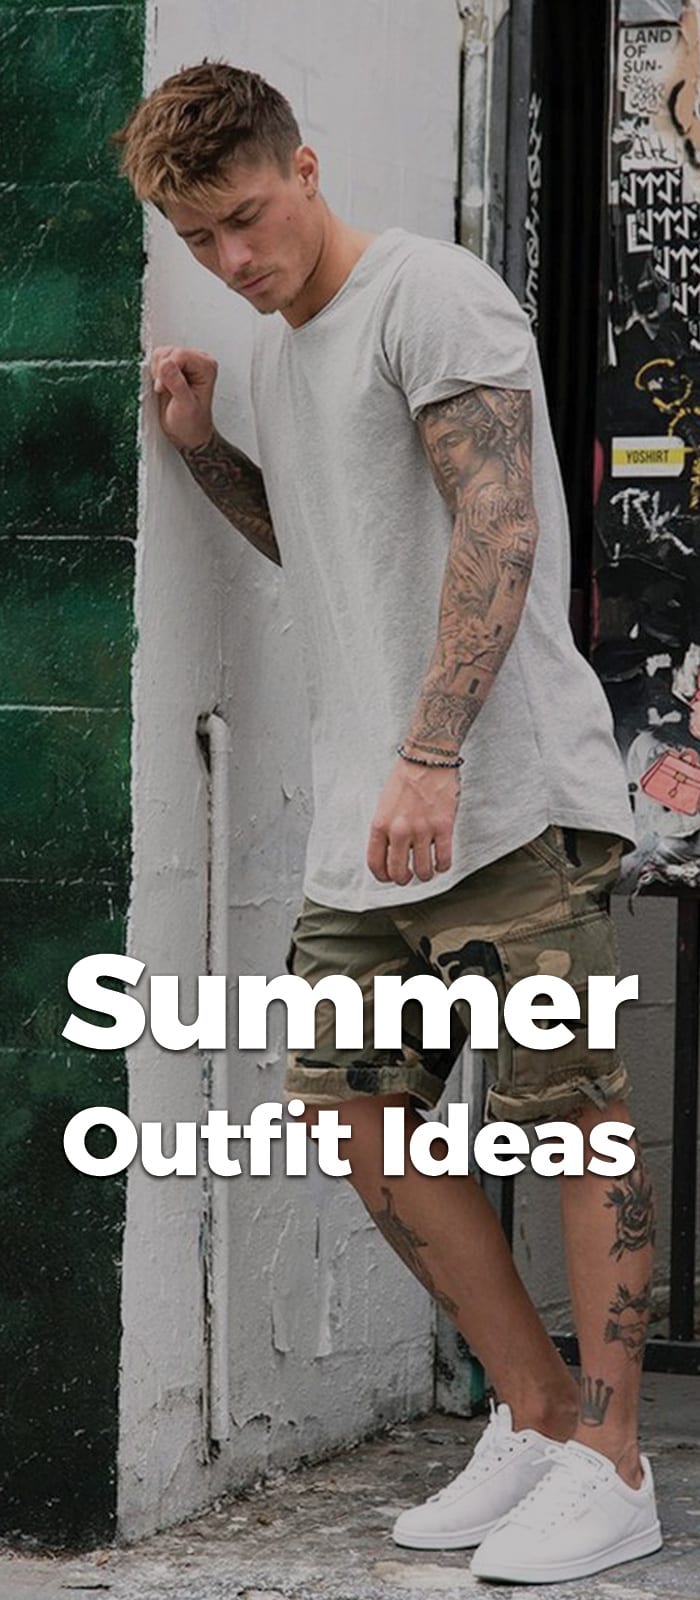 Best Summer outfit ideas for Men